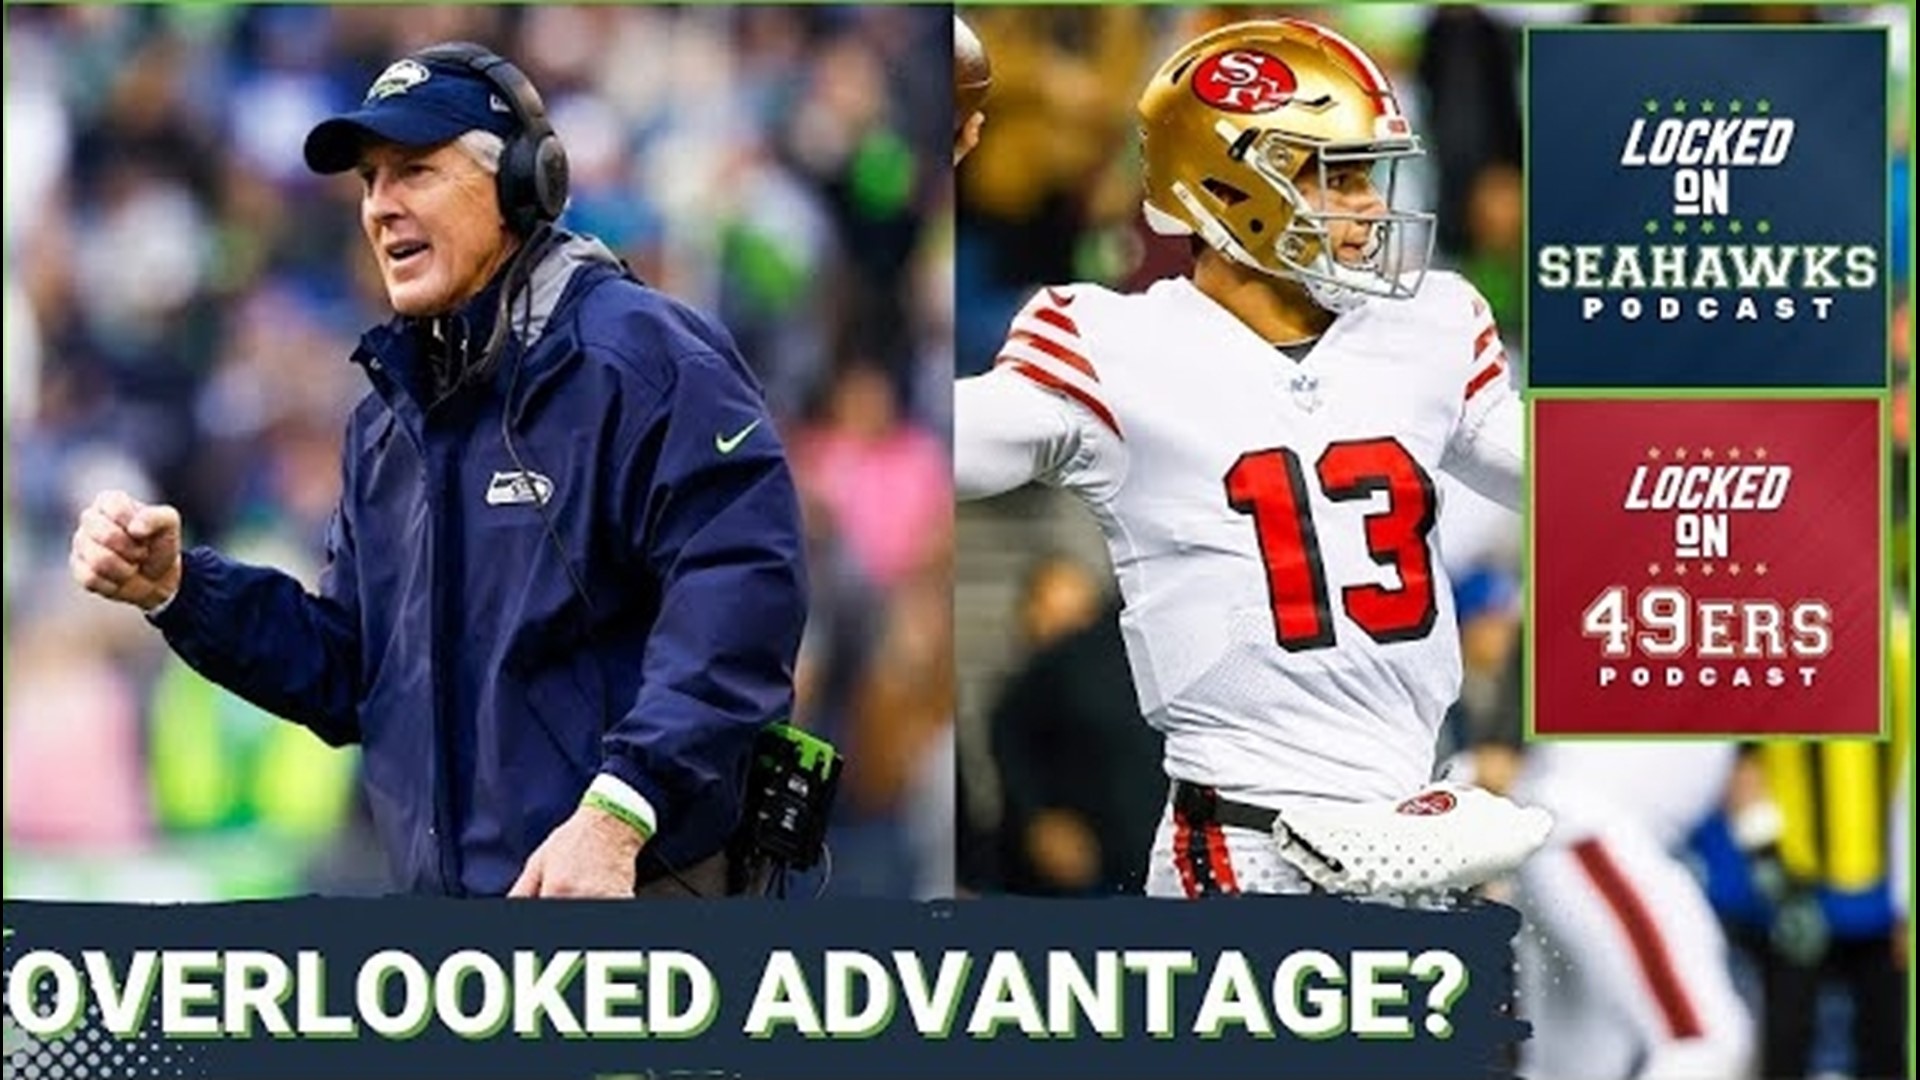 when do the seahawks and 49ers play